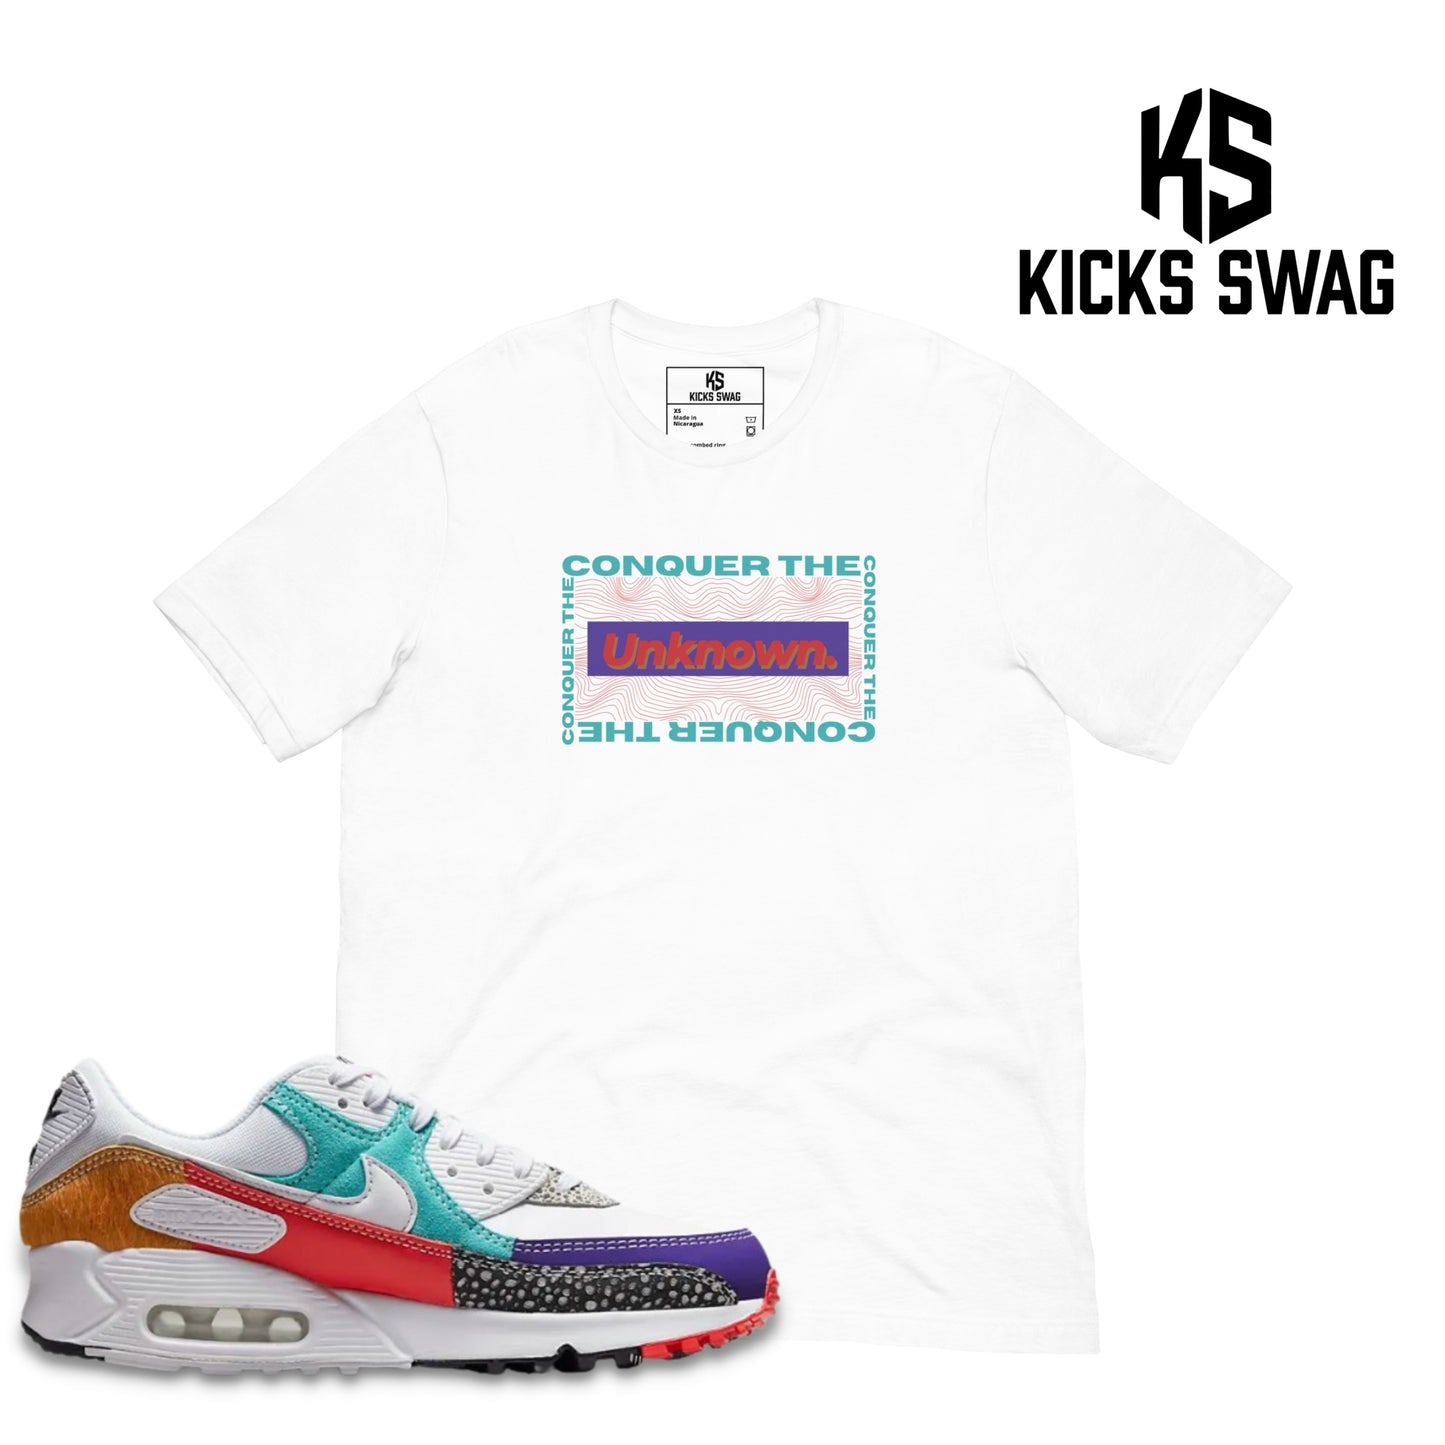 T-shirt - Nike Air Max 90 SE (Conquer the Unknown)